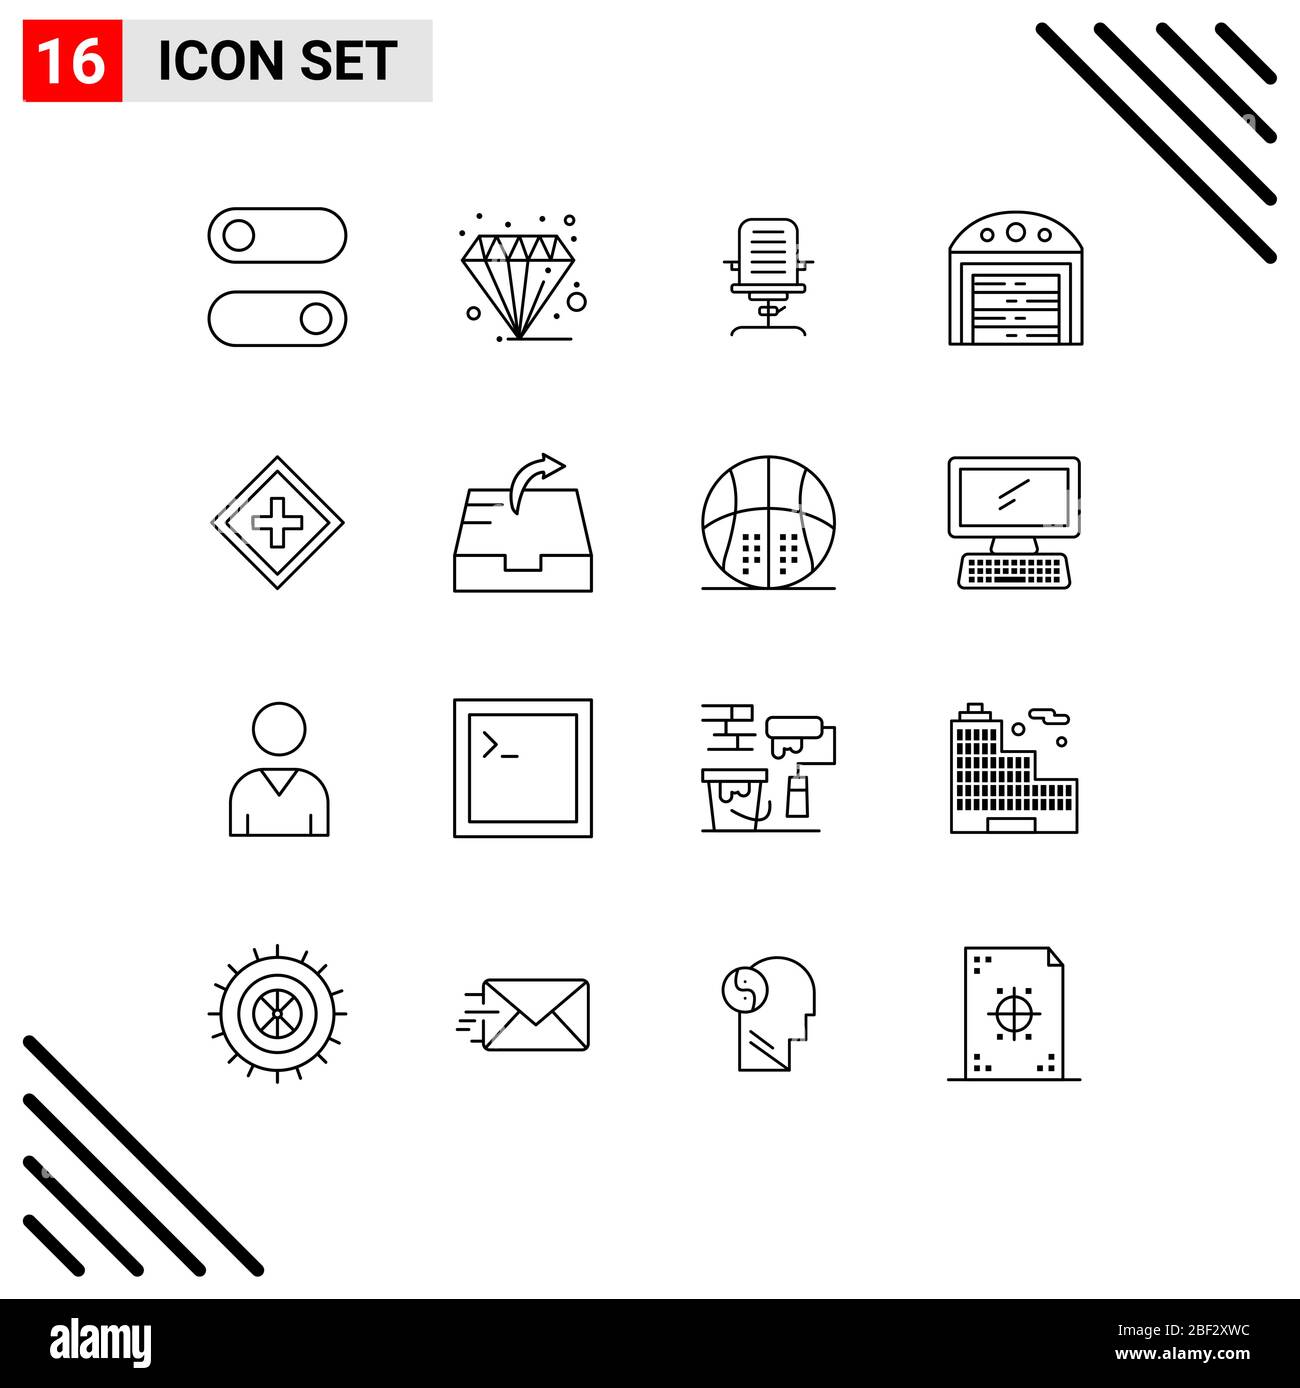 Outline Pack Of 16 Universal Symbols Of Customer Construction